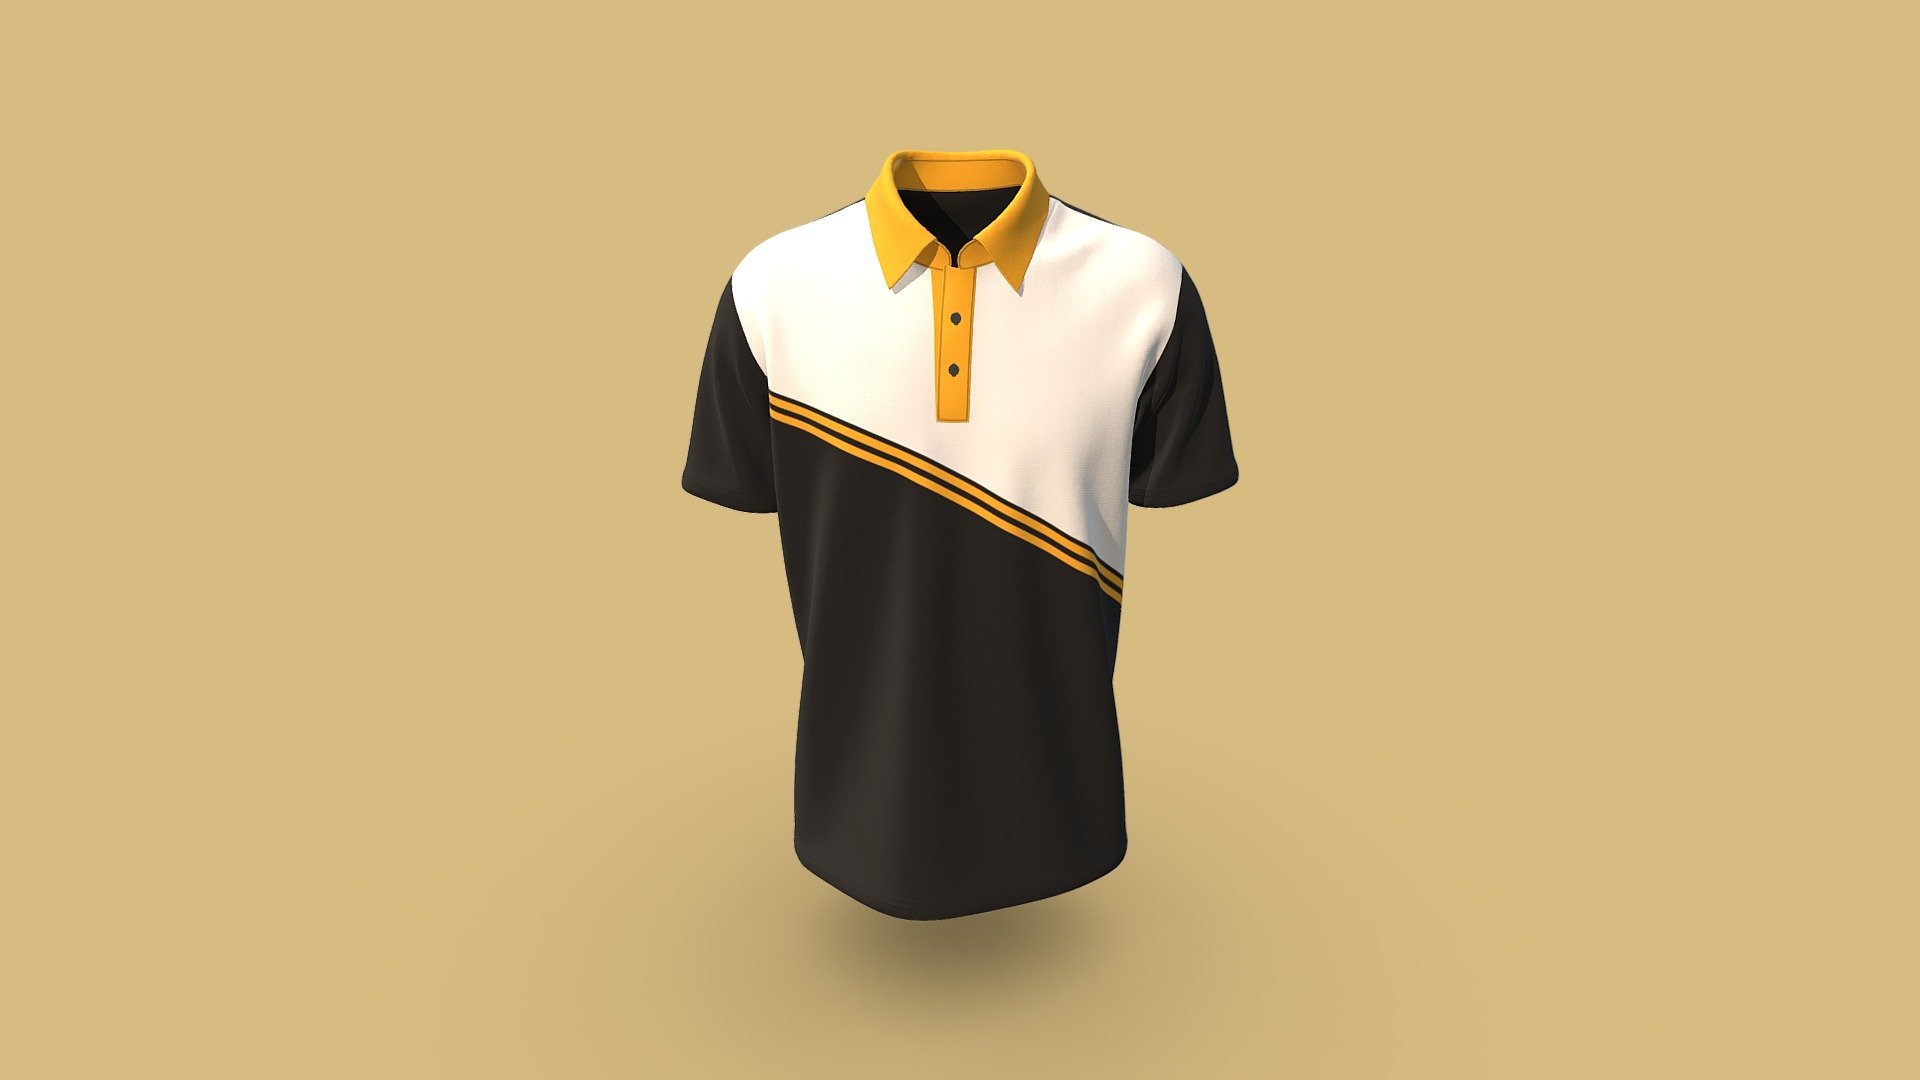 Cloth Title = Top Quality Men's Stylish Polo T- Shirt 

SKU = DG100253 

Category = Men 

Product Type = Polo 

Cloth Length = Regular 

Body Fit = Relaxed Fit 

Occasion = Casual  

Sleeve Style = Short Sleeve 


Our Services:

3D Apparel Design.

OBJ,FBX,GLTF Making with High/Low Poly.

Fabric Digitalization.

Mockup making.

3D Teck Pack.

Pattern Making.

2D Illustration.

Cloth Animation and 360 Spin Video.


Contact us:- 

Email: info@digitalfashionwear.com 

Website: https://digitalfashionwear.com 


We designed all the types of cloth specially focused on product visualization, e-commerce, fitting, and production. 

We will design: 

T-shirts 

Polo shirts 

Hoodies 

Sweatshirt 

Jackets 

Shirts 

TankTops 

Trousers 

Bras 

Underwear 

Blazer 

Aprons 

Leggings 

and All Fashion items. 





Our goal is to make sure what we provide you, meets your demand 3d model